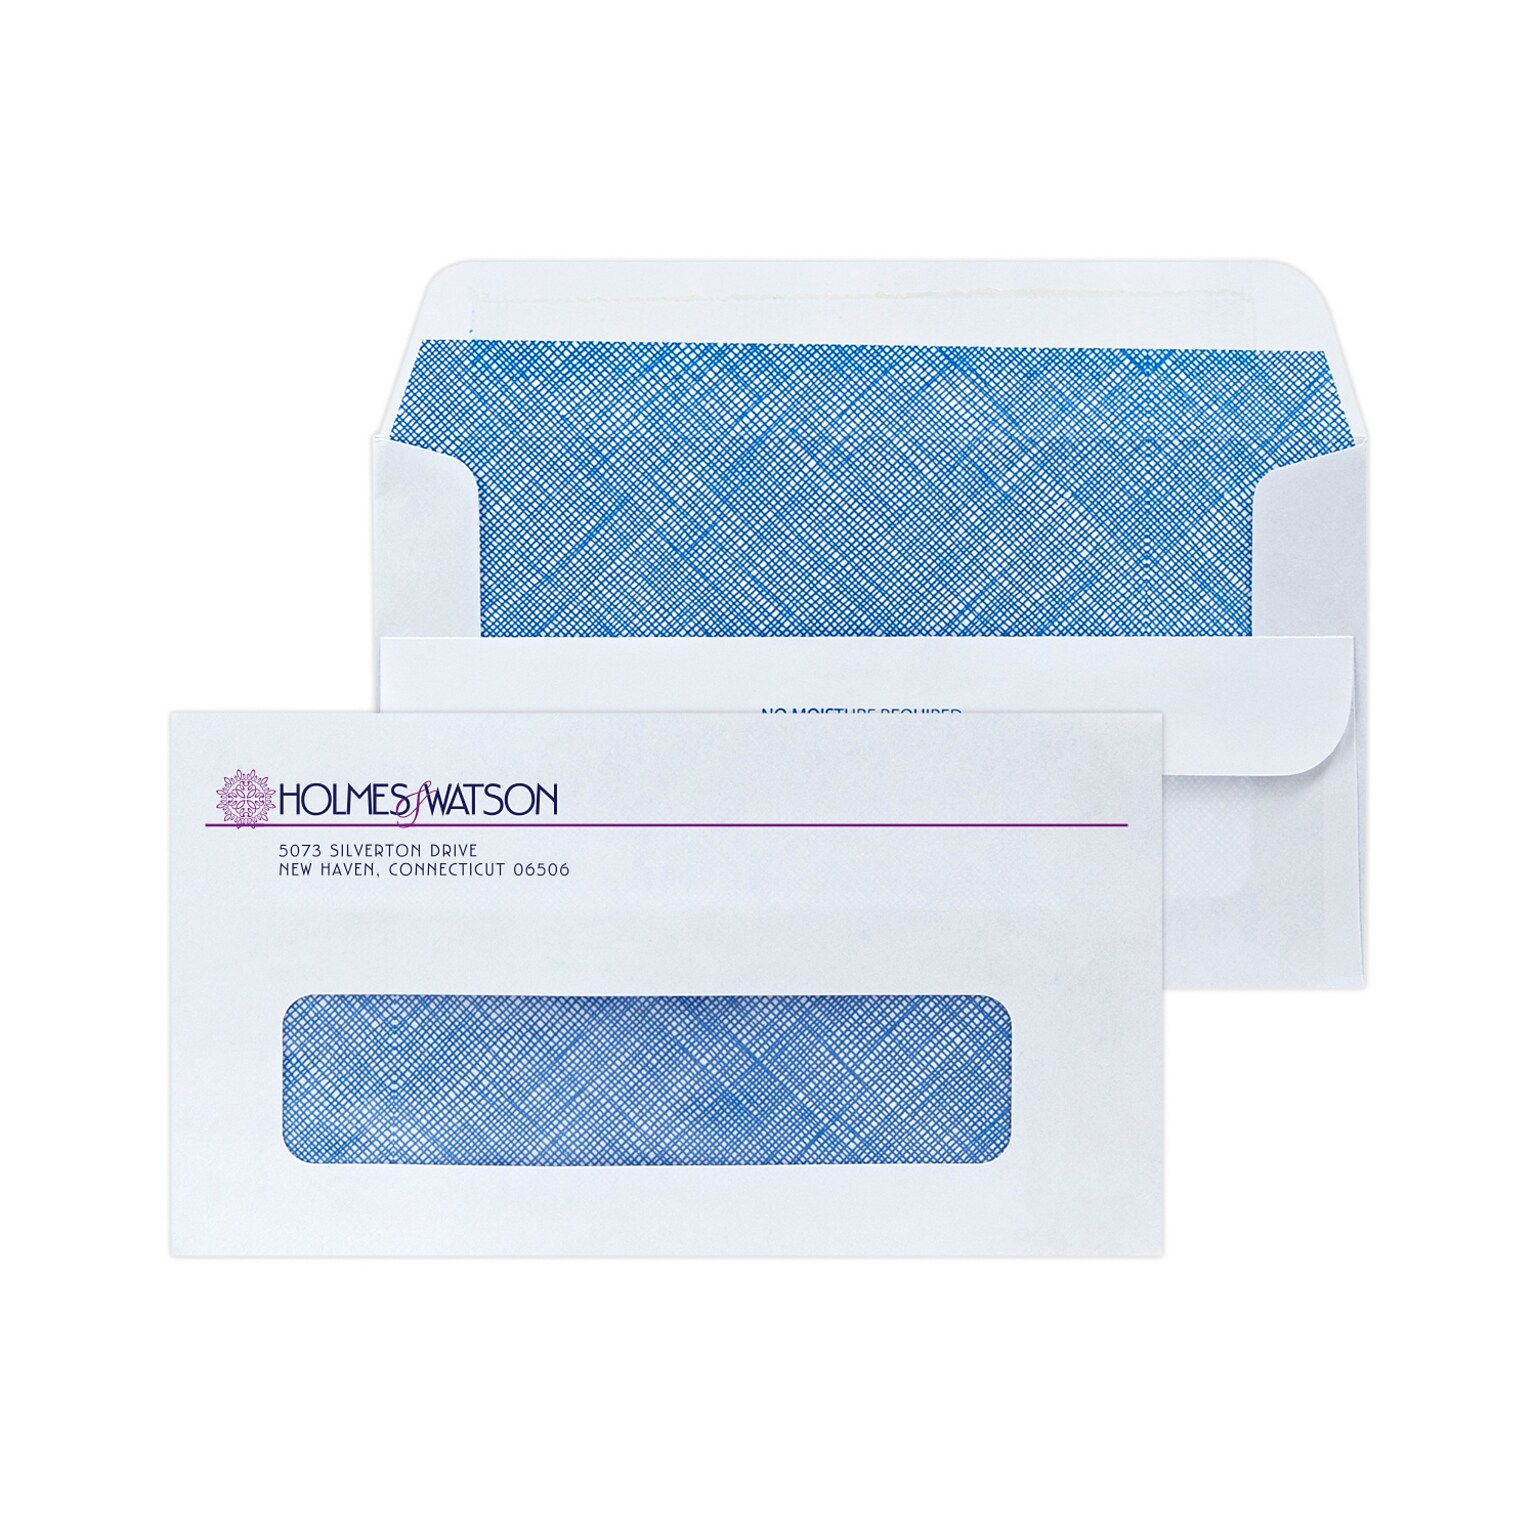 Custom #6-3/4 Self Seal Window Envelopes with Security Tint, 3 5/8 x 6 1/2, 24# White Wove, 2 Custom Inks, 250 / Pack